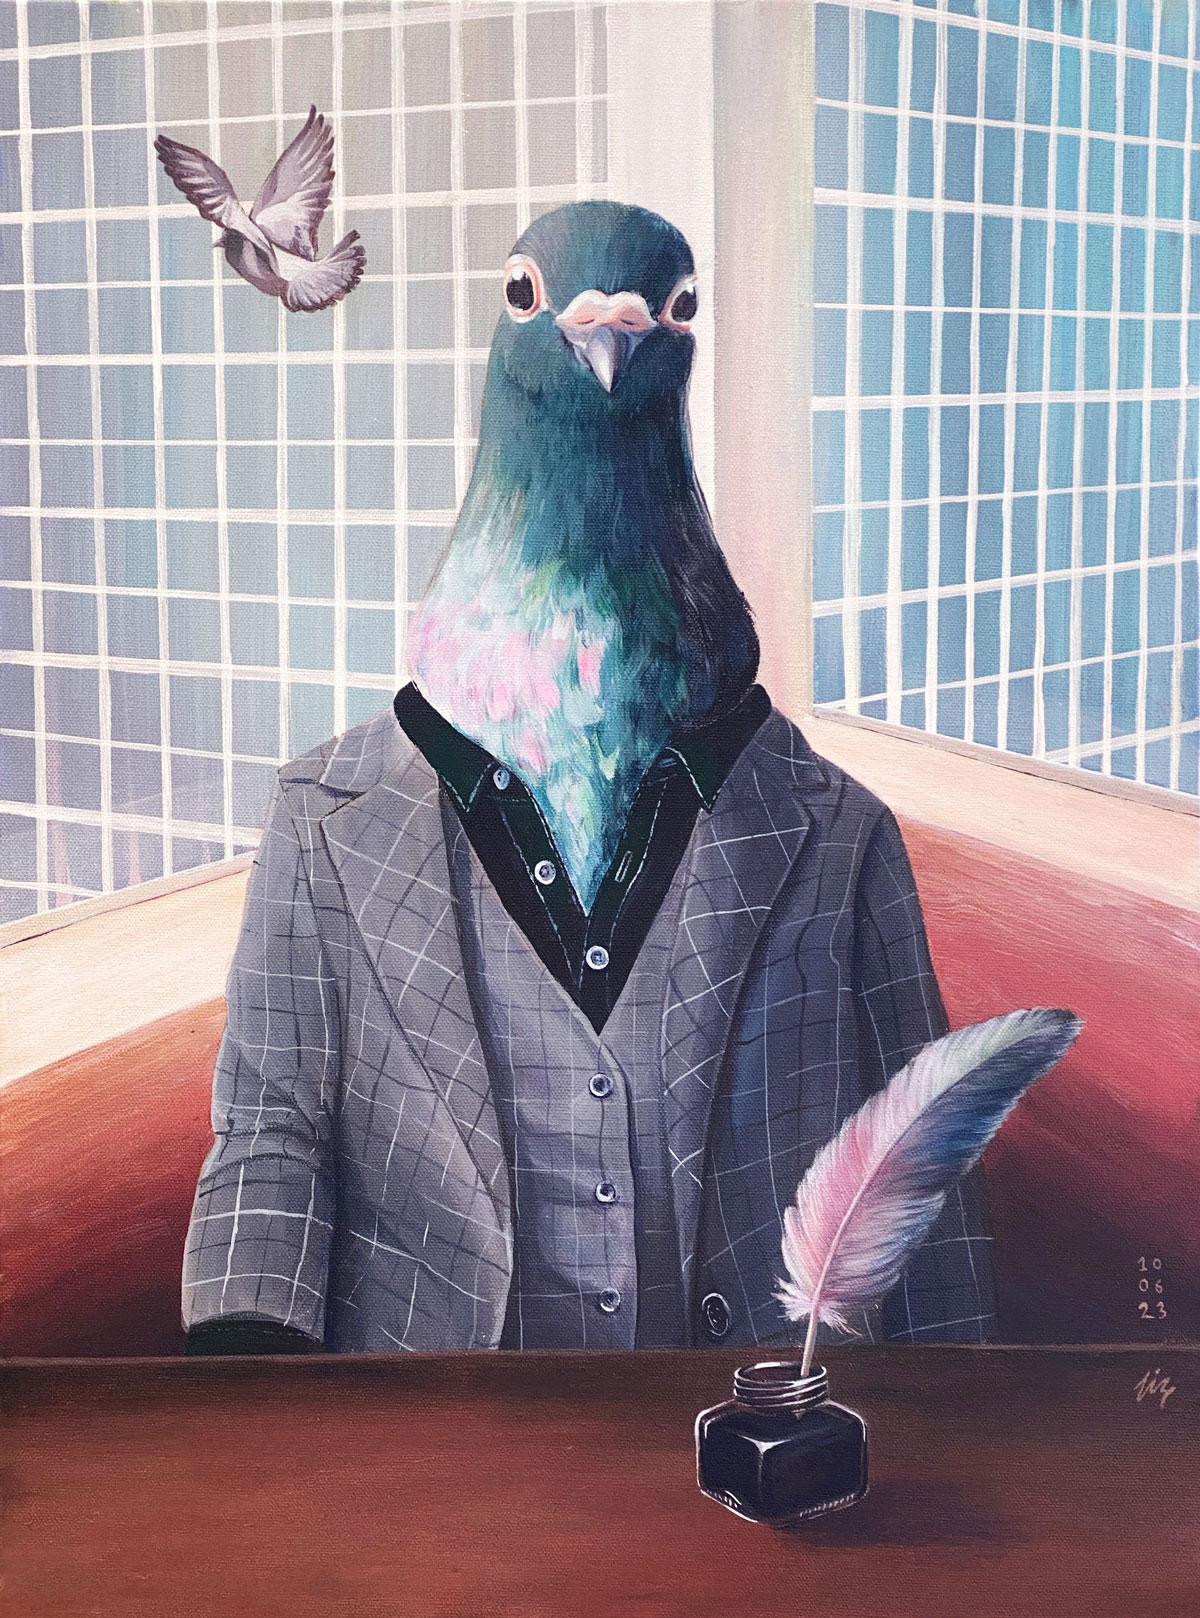 Chairman of the Bird, a surreal acrylic painting by Liz Broekhuyse